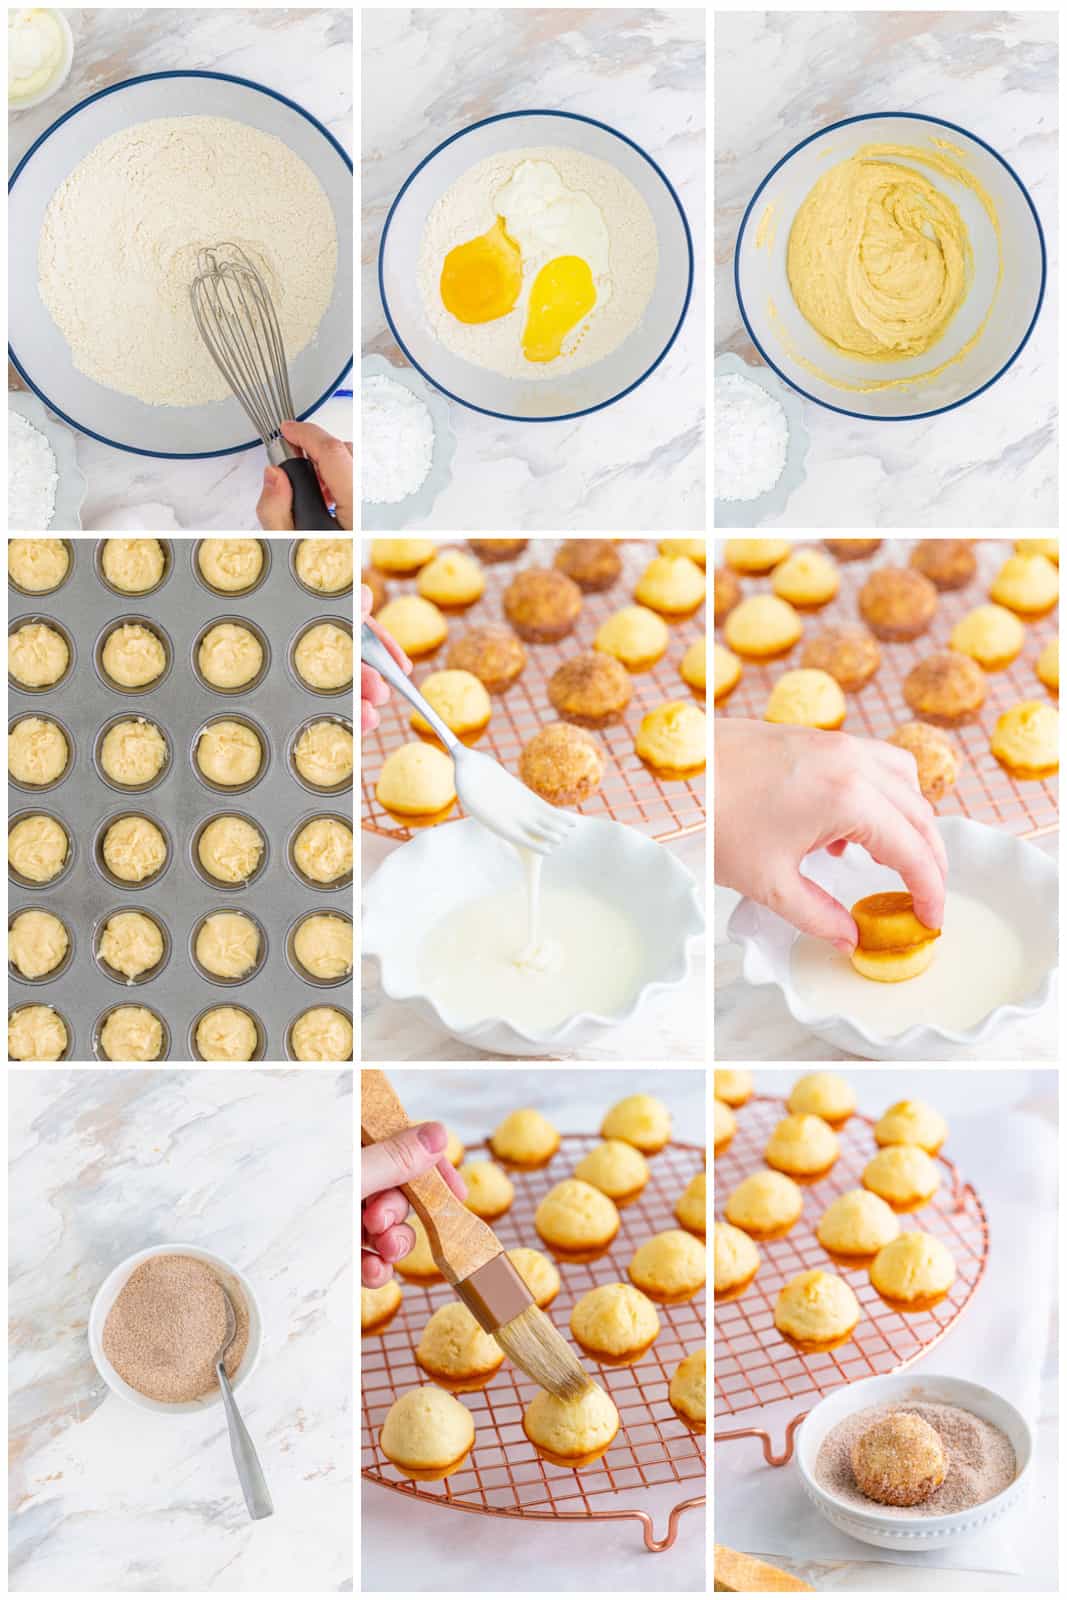 Step by step photos on how to make Baked Donut Holes.